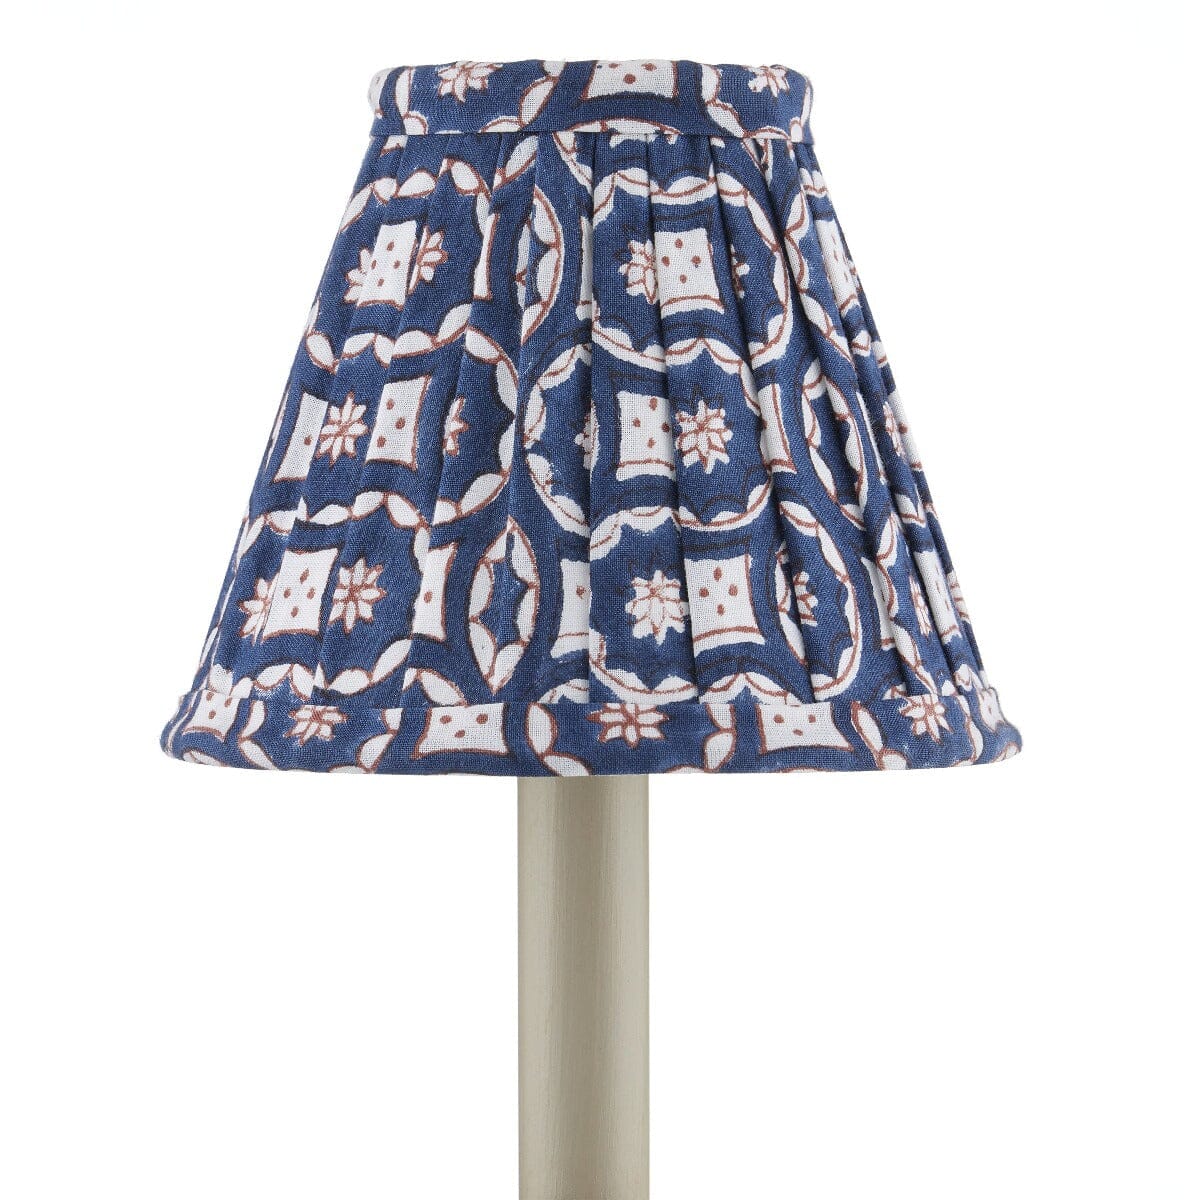 Block Print Pleated Chandelier Shade Navy Multi - Set of 2 Shades 